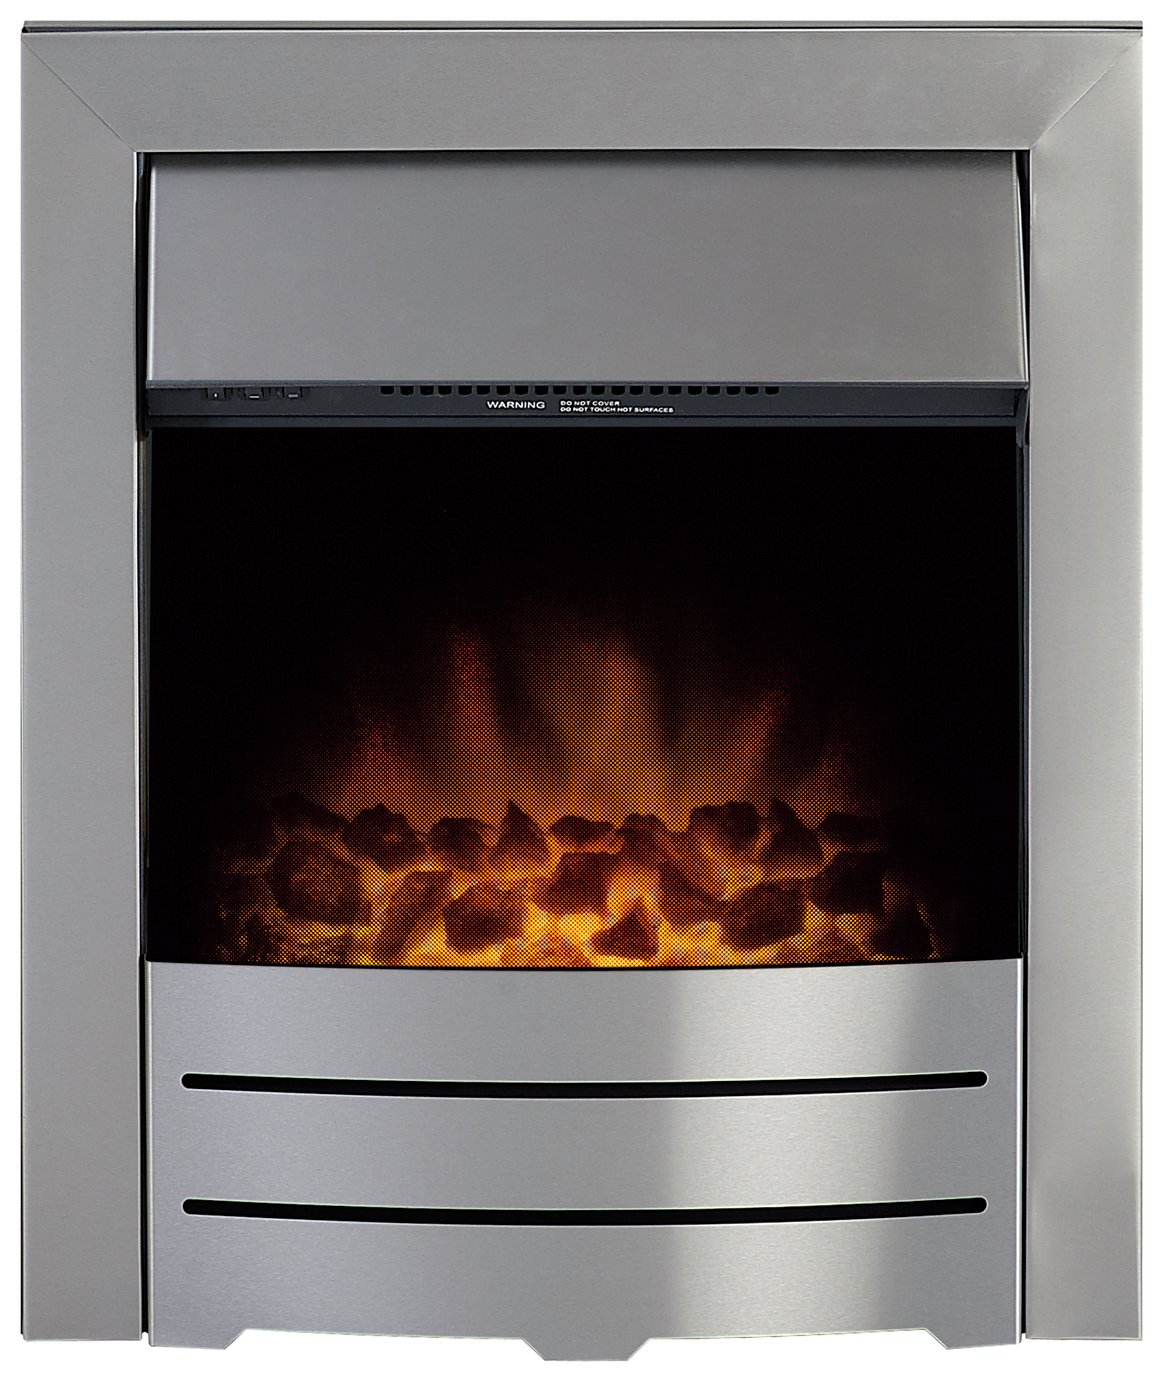 Adam Colorado 2kW Electric Inset Fire - Brushed Steel